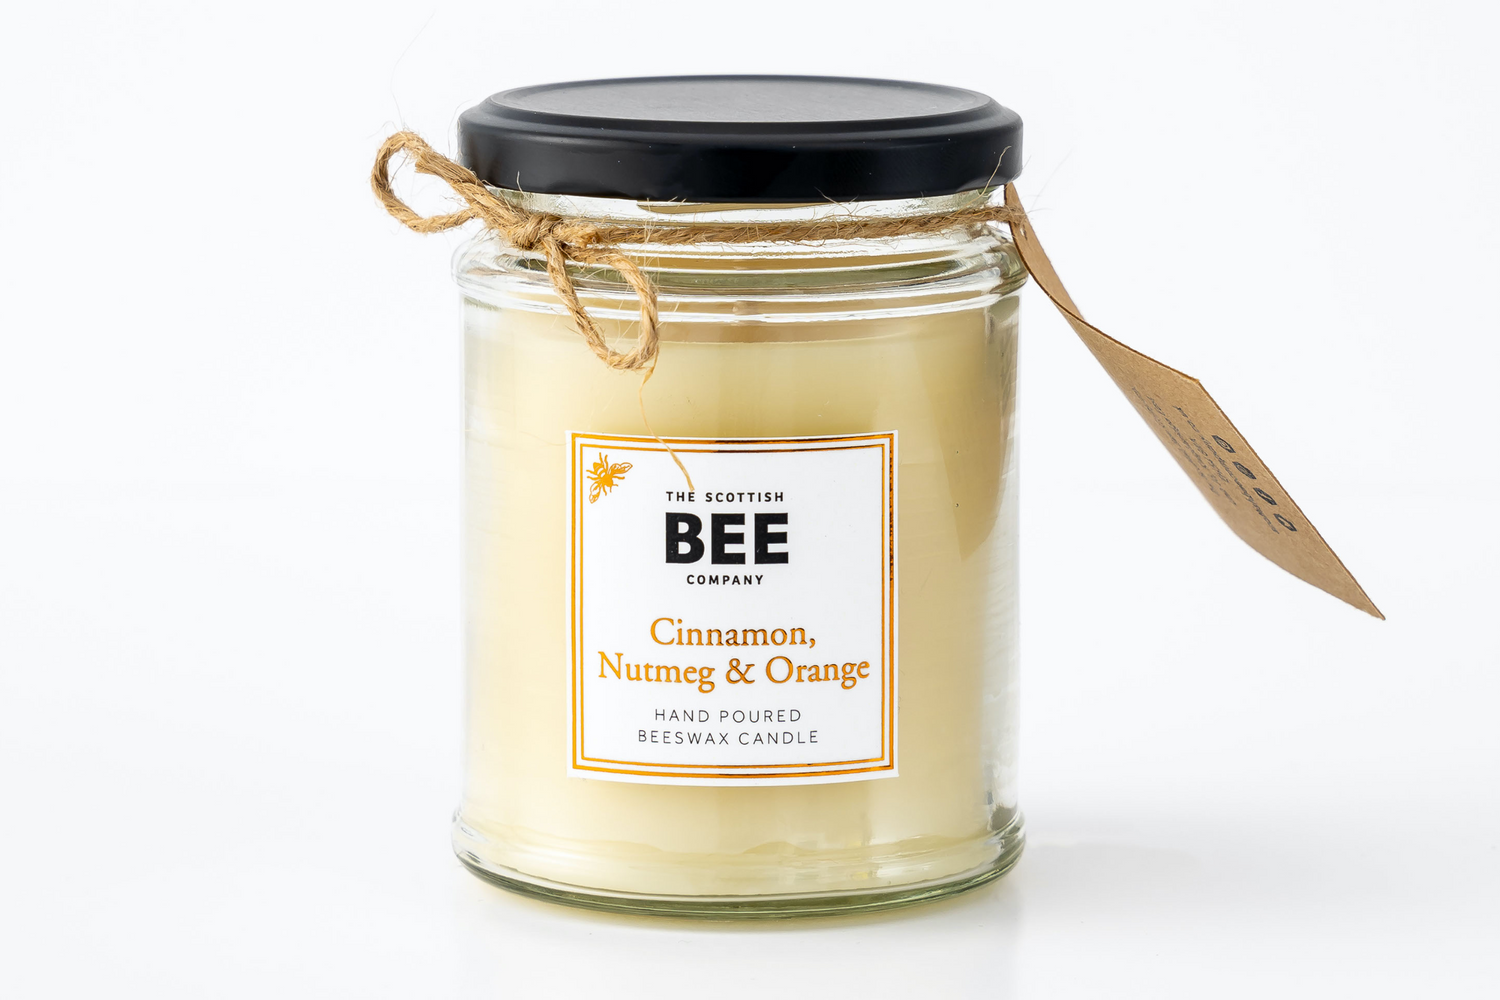 Are beeswax candles safe?